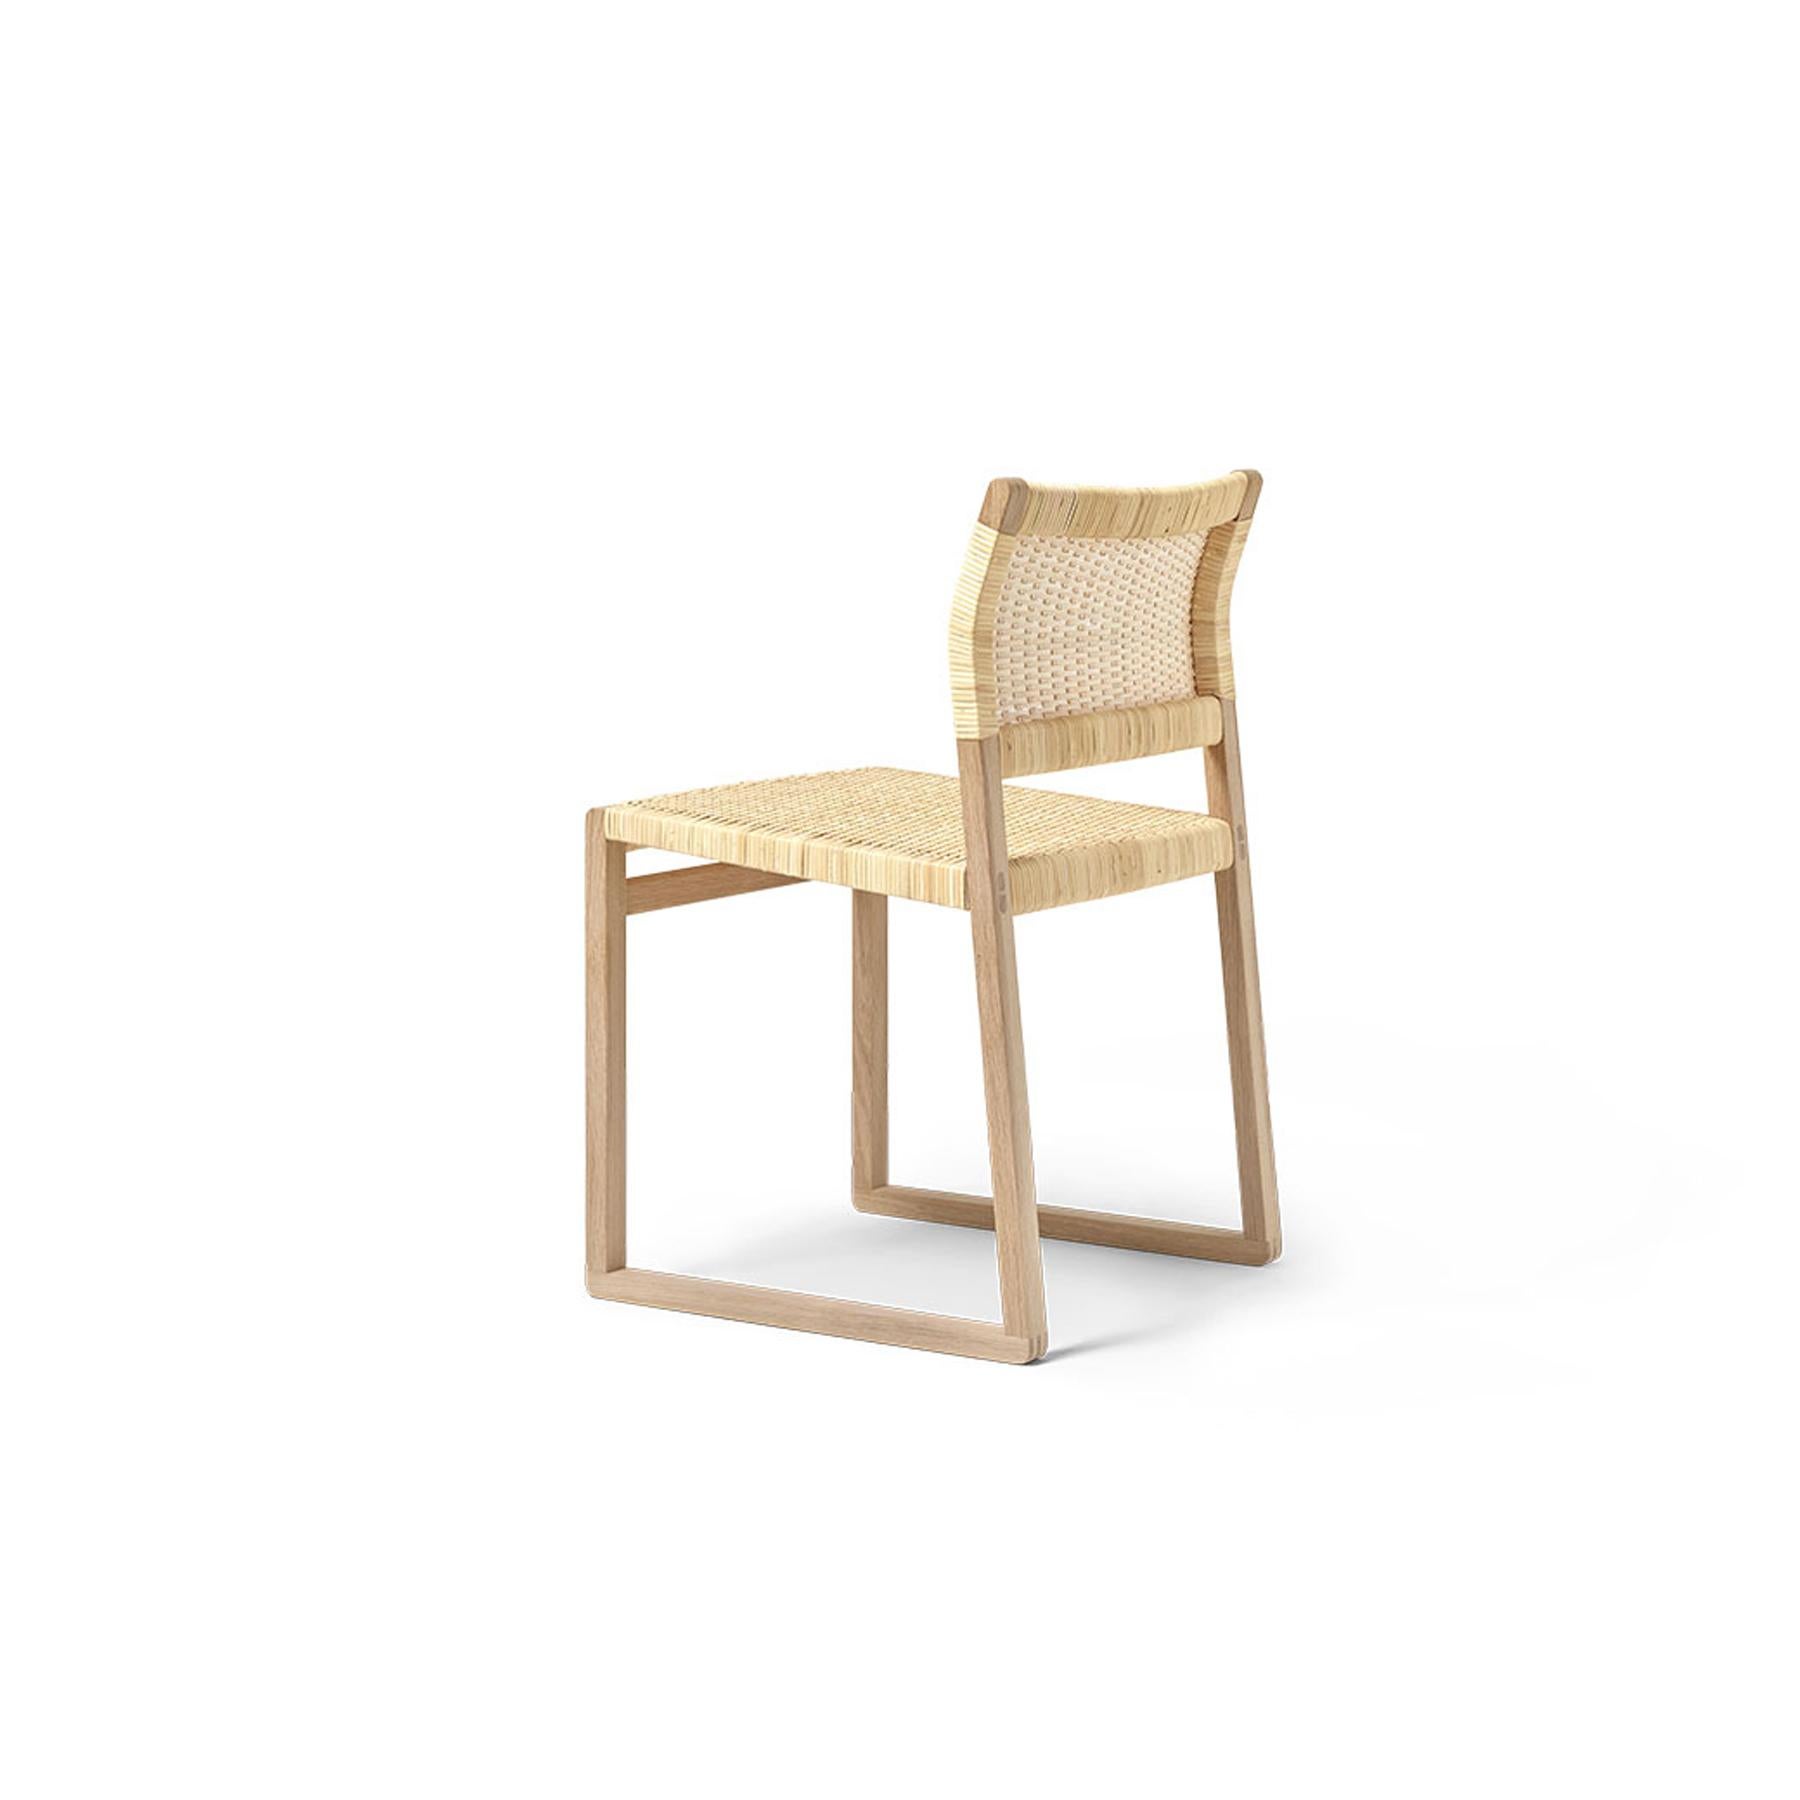 Slender yet solid, simple yet striking, the BM61 dining chair brings us back to nature in a welcome return to simple shapes that capture the essence of a concept. Exposed construction. And authentic materials that outlast any temporary trend.

For